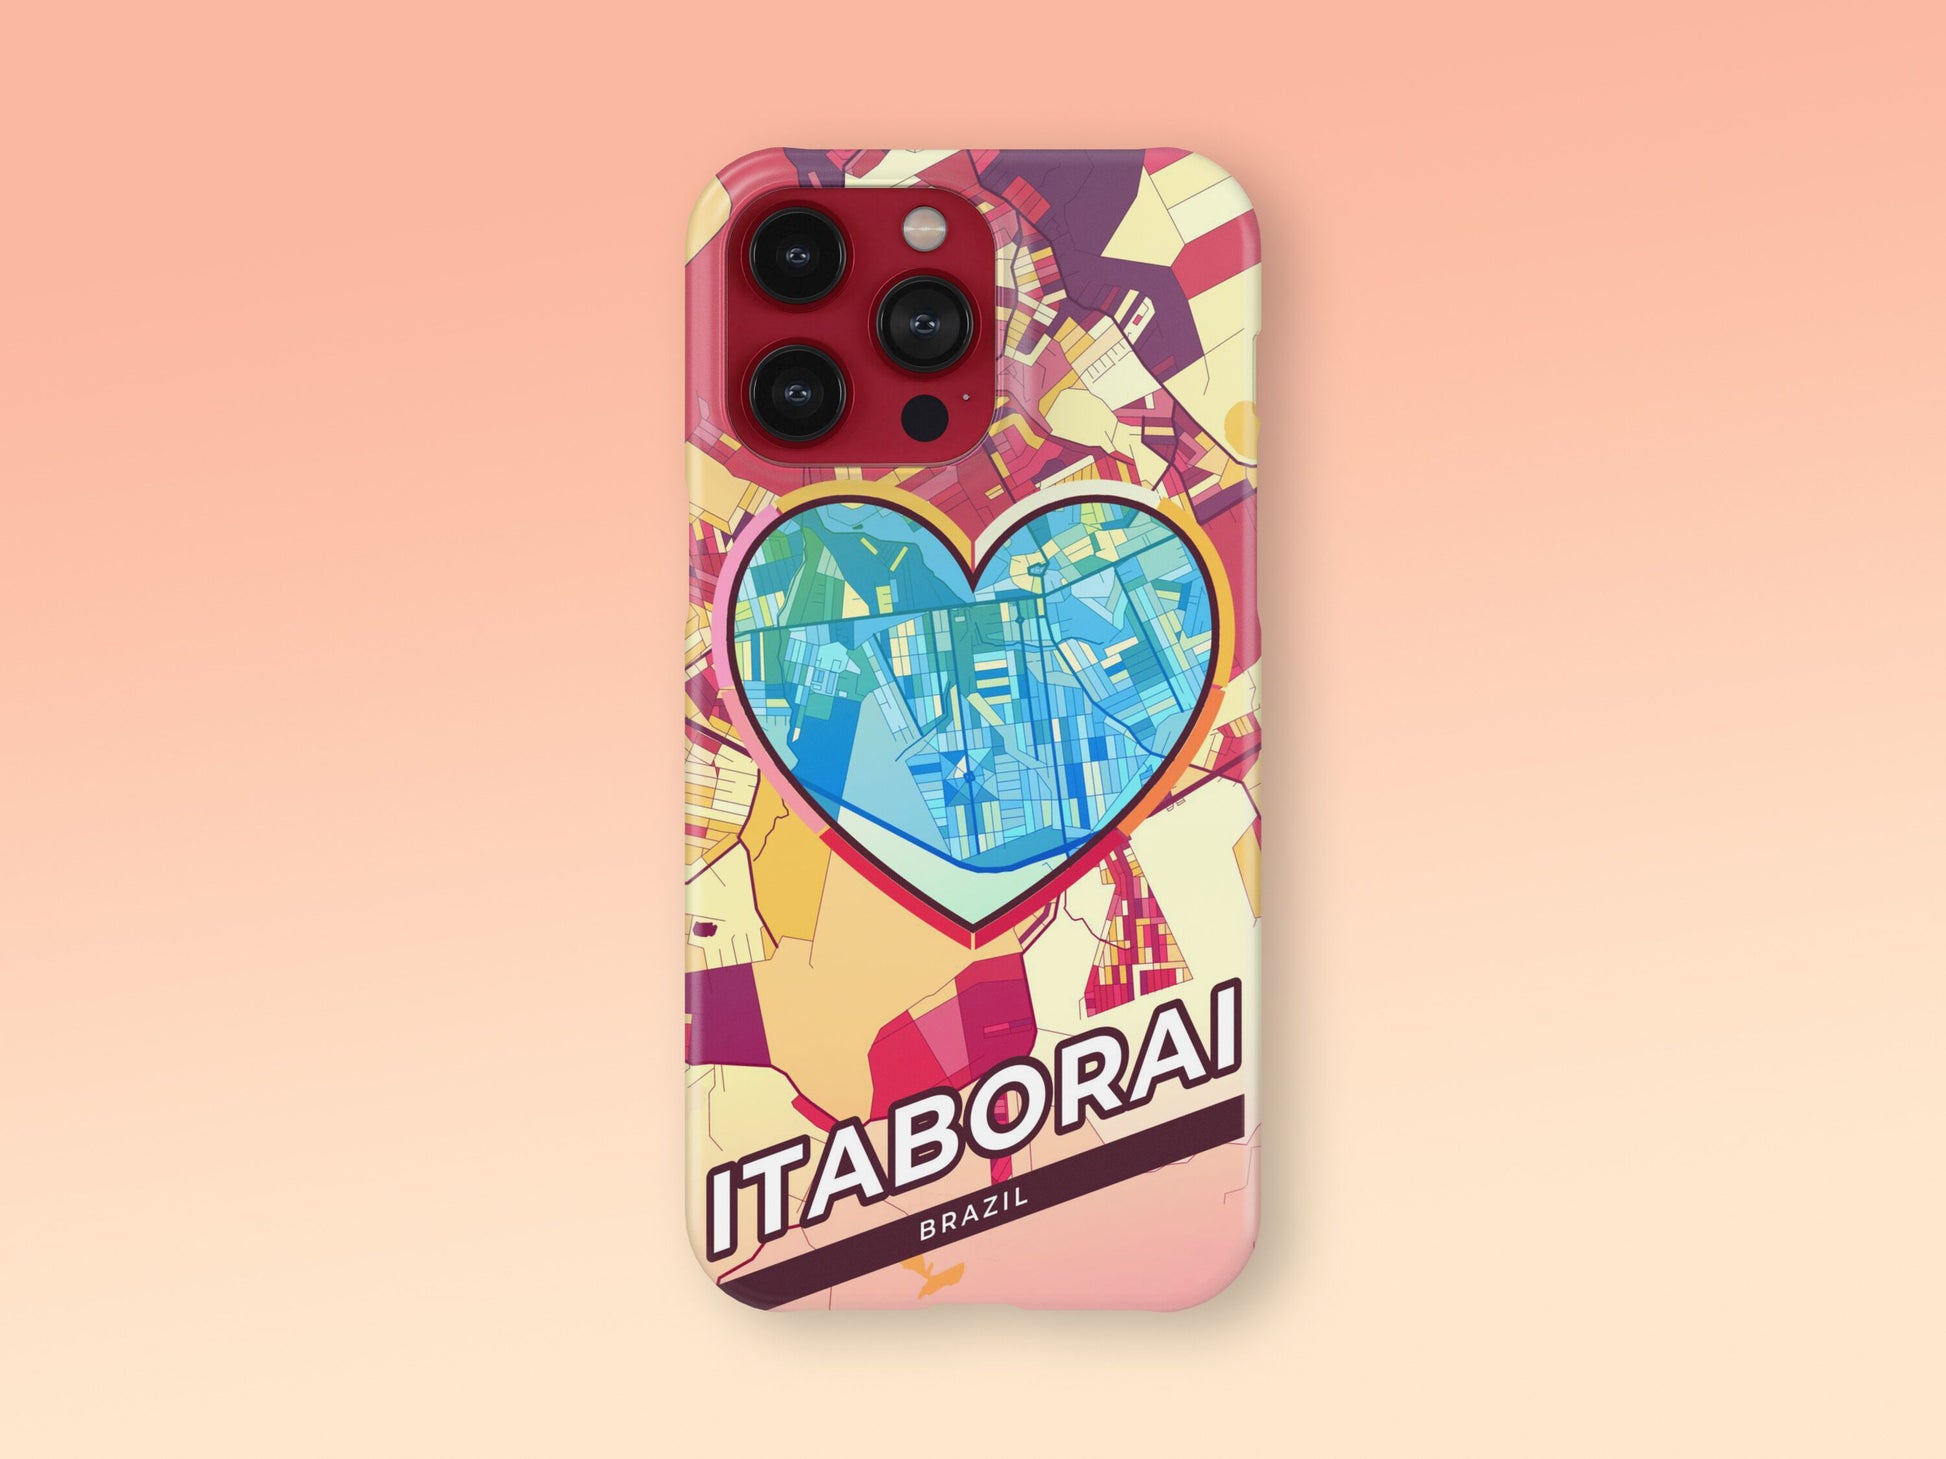 Itaborai Brazil slim phone case with colorful icon. Birthday, wedding or housewarming gift. Couple match cases. 2